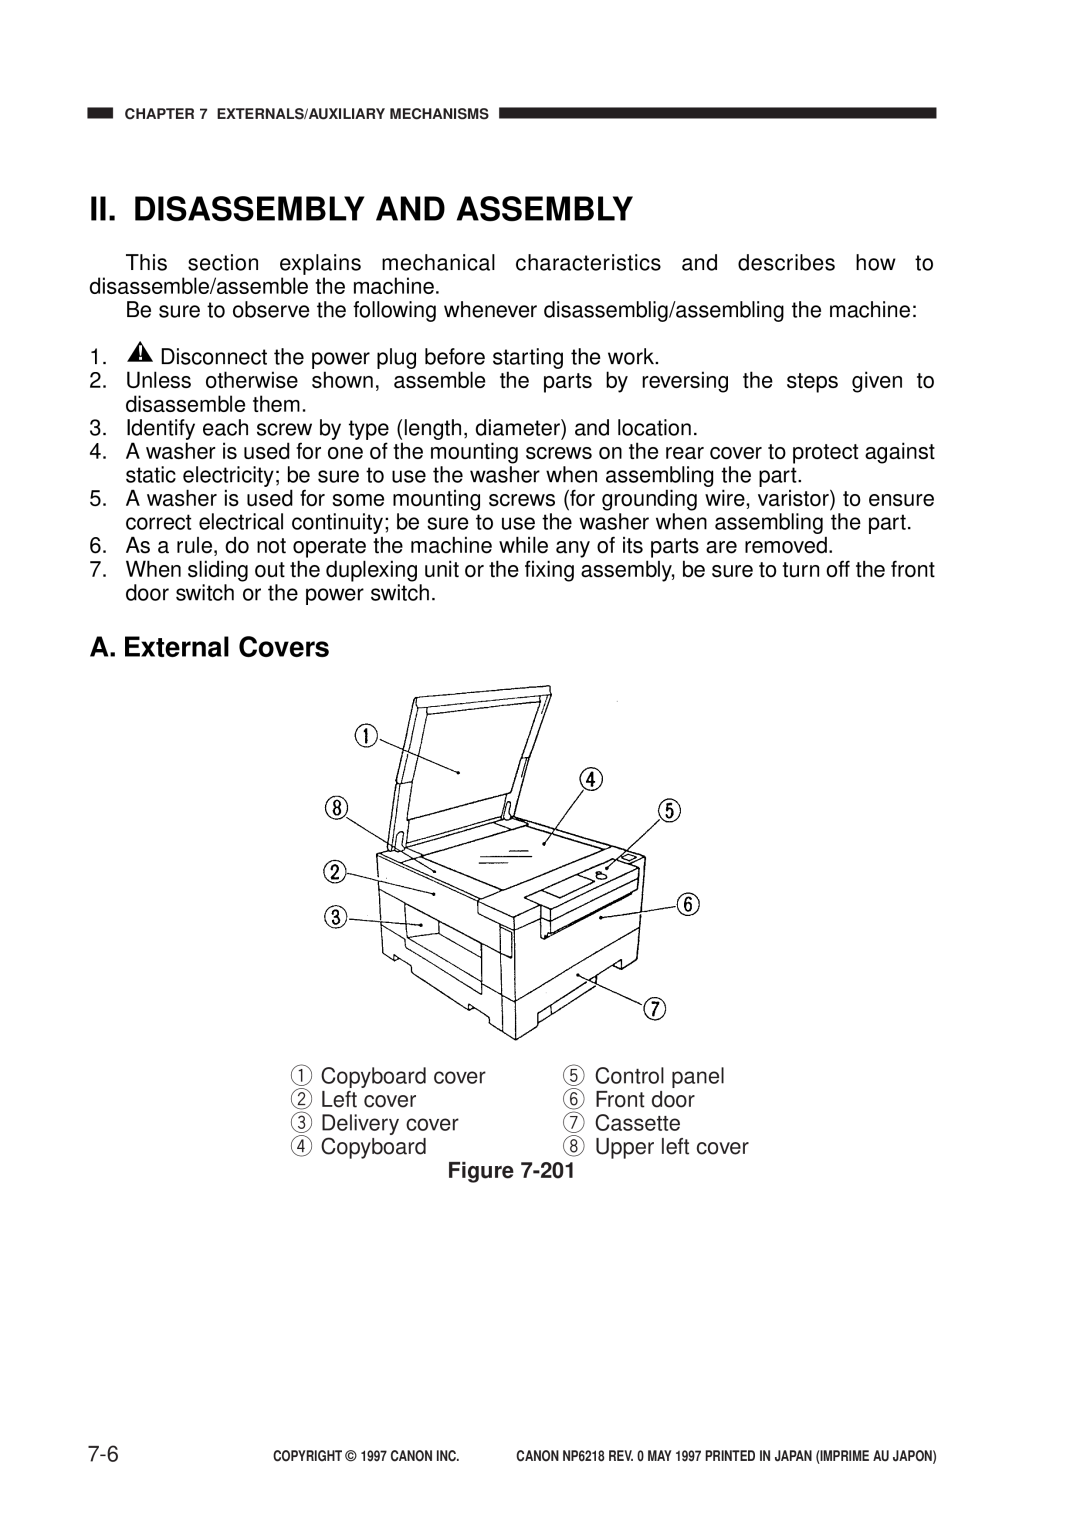 Canon FY8-13EX-000, NP6218 service manual A. External Covers, Ii. Disassembly And Assembly 